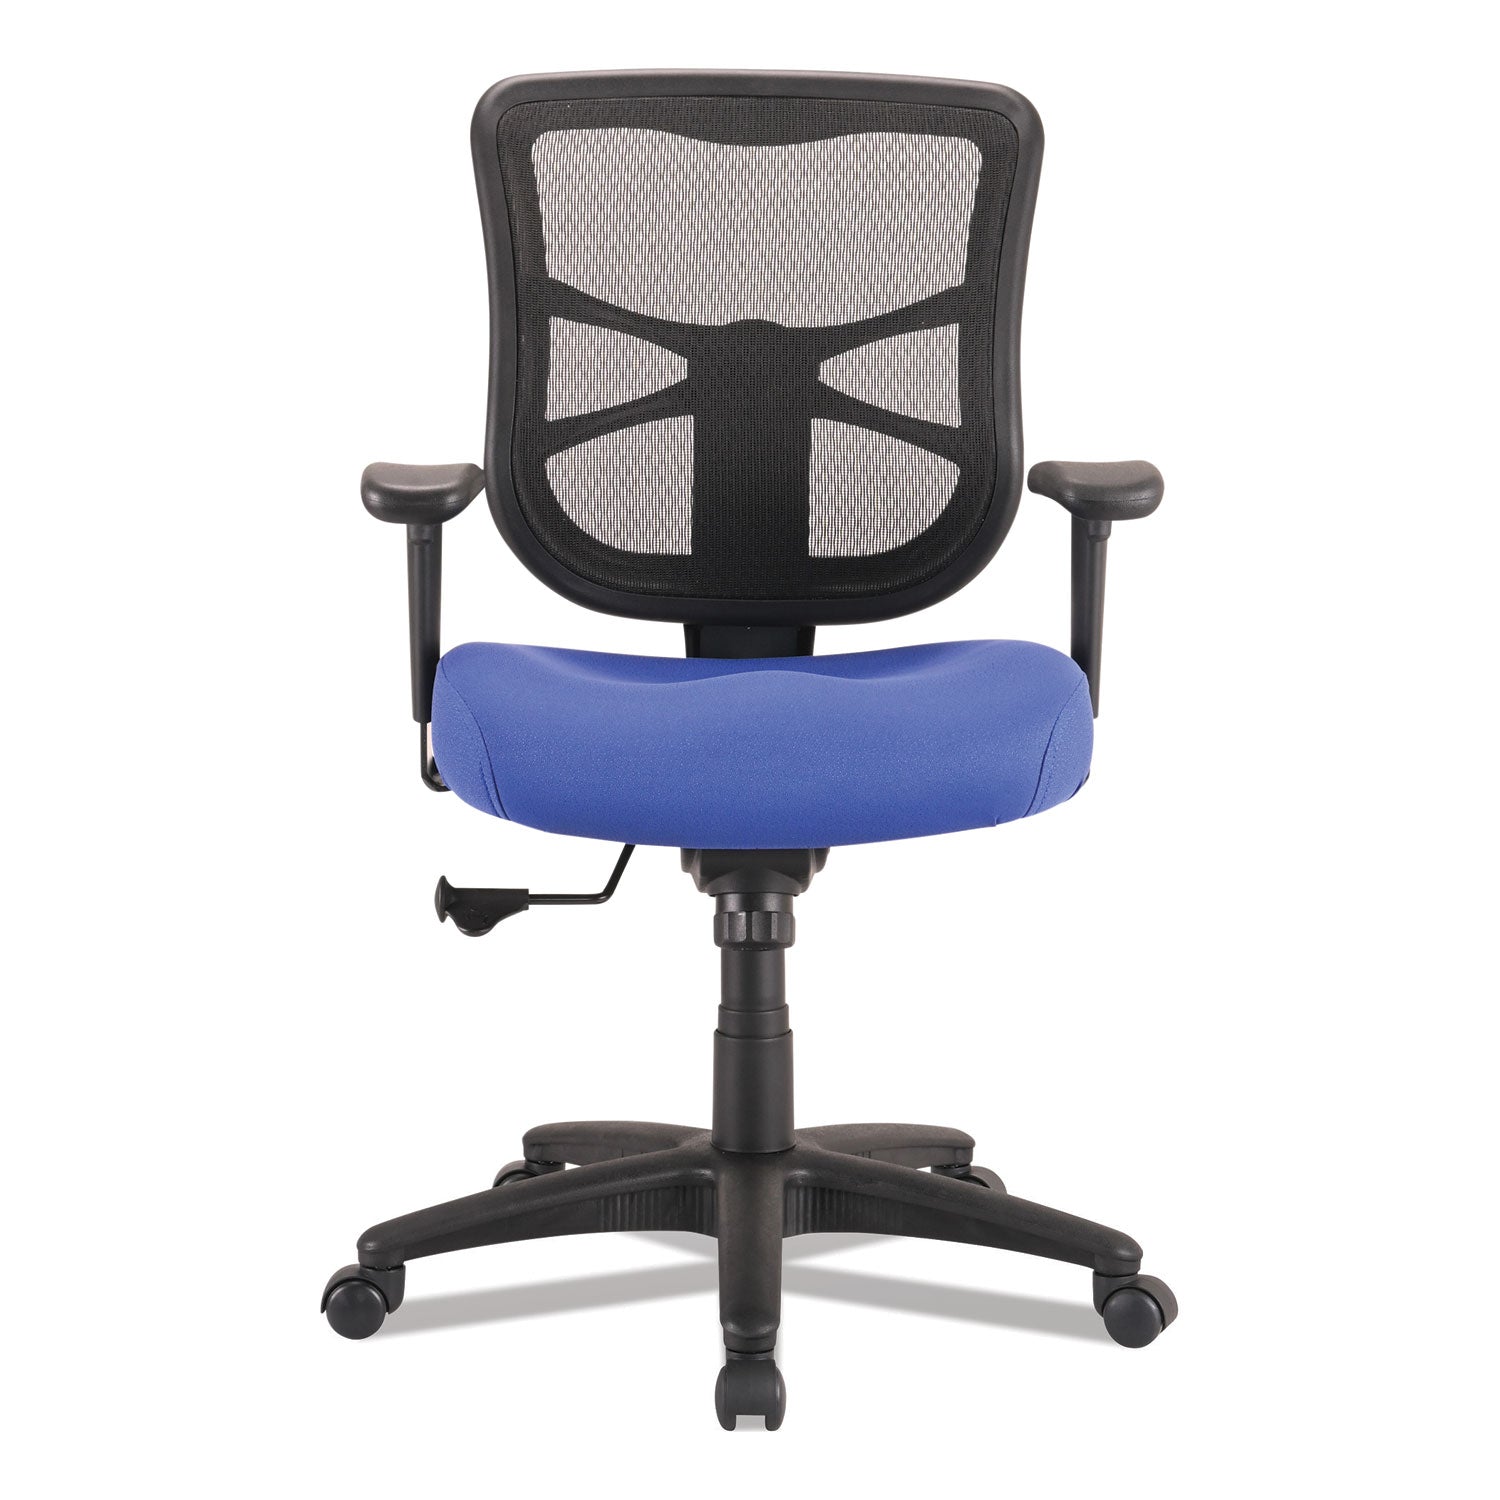 alera-elusion-series-mesh-mid-back-swivel-tilt-chair-supports-up-to-275-lb-179-to-218-seat-height-navy-seat_aleel42bme20b - 3